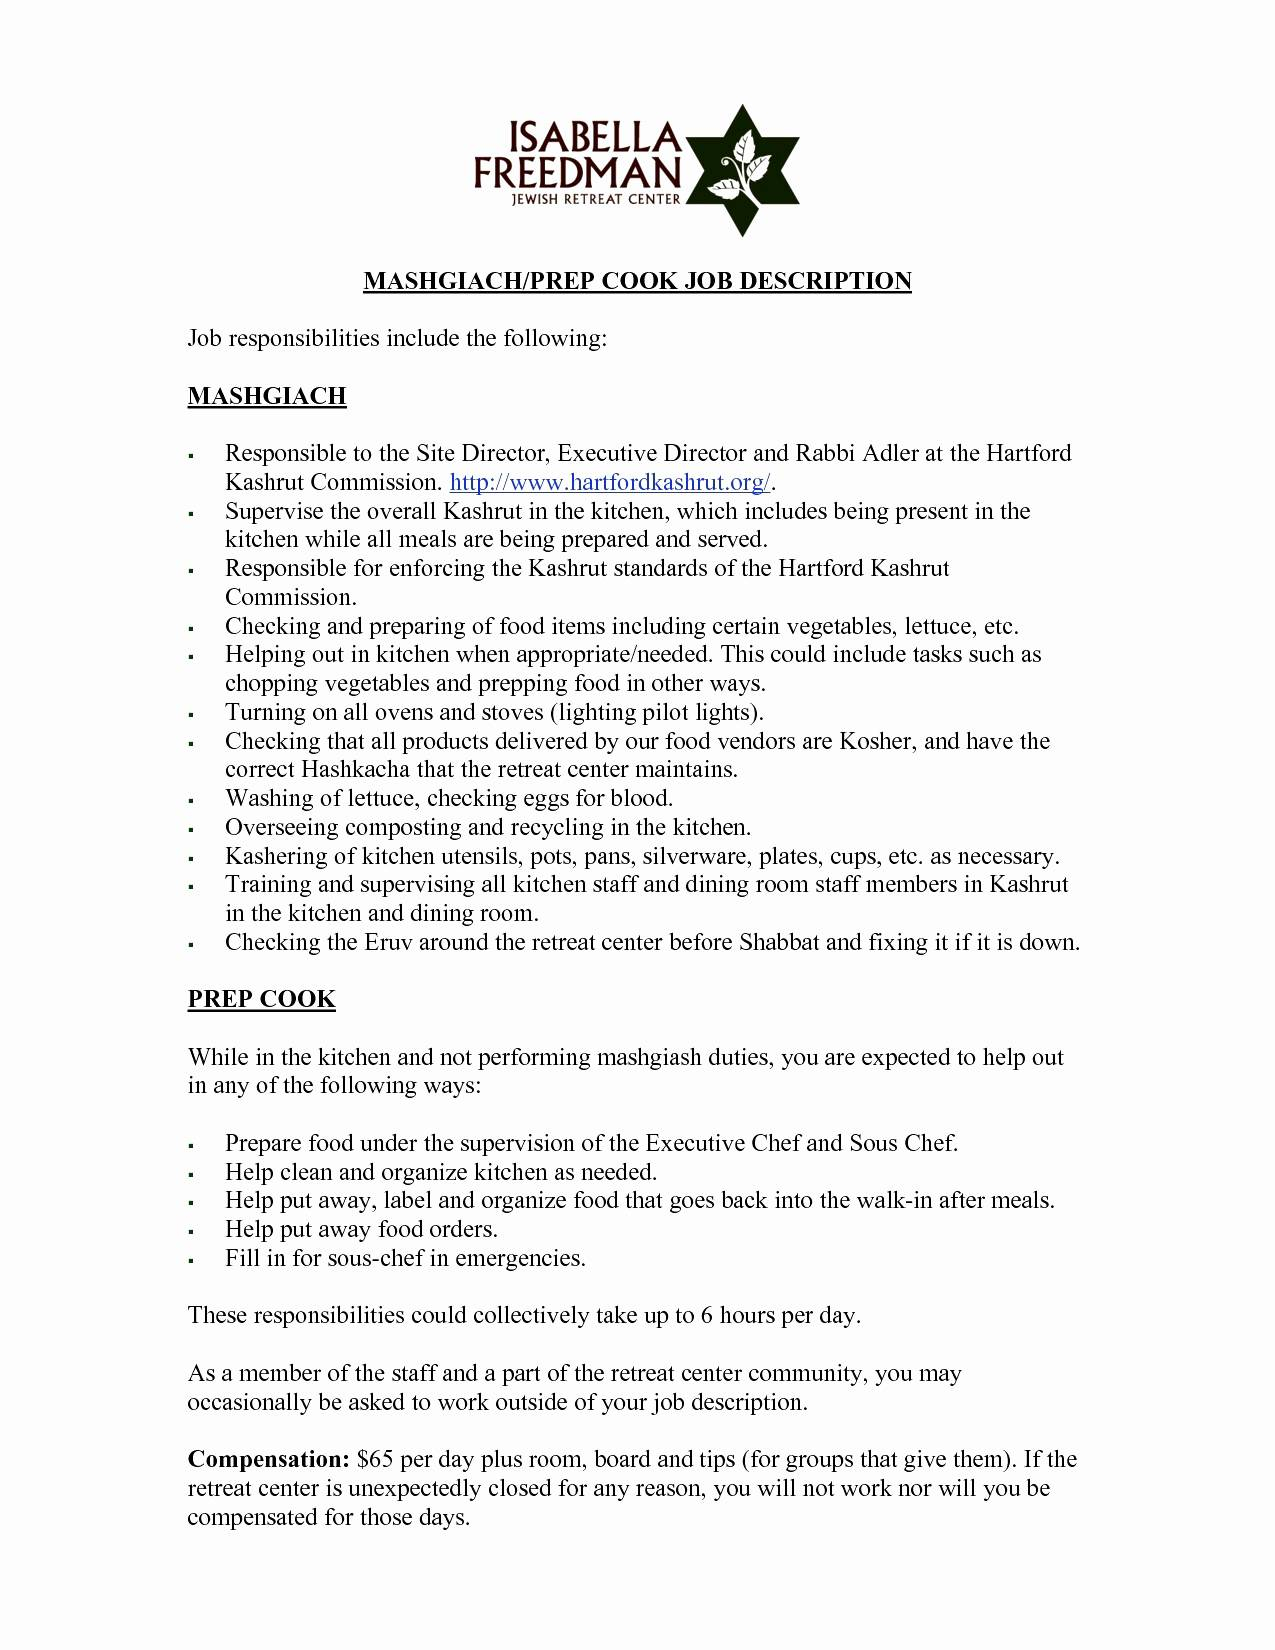 Help Desk Cover Letter Template - Help with Writing A Cover Letter Fresh Marketing Director Cover